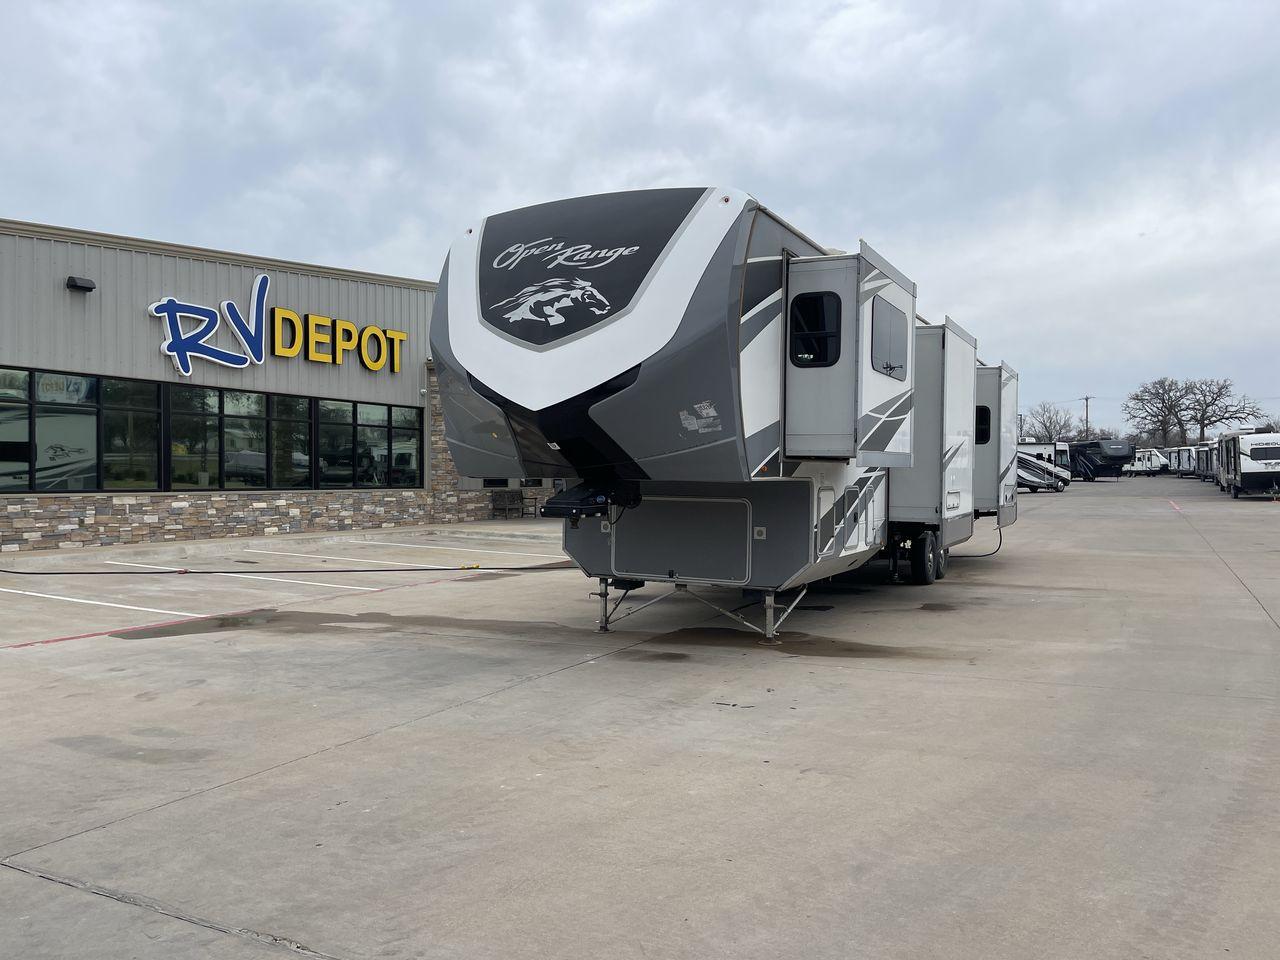 2018 HIGHLAND RIDGE OPEN RANGE 3X387RBS (58TCH0BVXJ3) , Length: 41.5 ft. | Dry Weight: 13,320 lbs. | Gross Weight: 16,470 lbs. | Slides: 5 transmission, located at 4319 N Main St, Cleburne, TX, 76033, (817) 678-5133, 32.385960, -97.391212 - This impressive model spans 41.5 feet in length and boasts a substantial GVWR of 16,470 lbs, ensuring both durability and stability on the road. Crafted with precision and attention to detail, the Open Range 3X387RBS features a robust aluminum frame and fiberglass sidewalls, promising years of relia - Photo #0